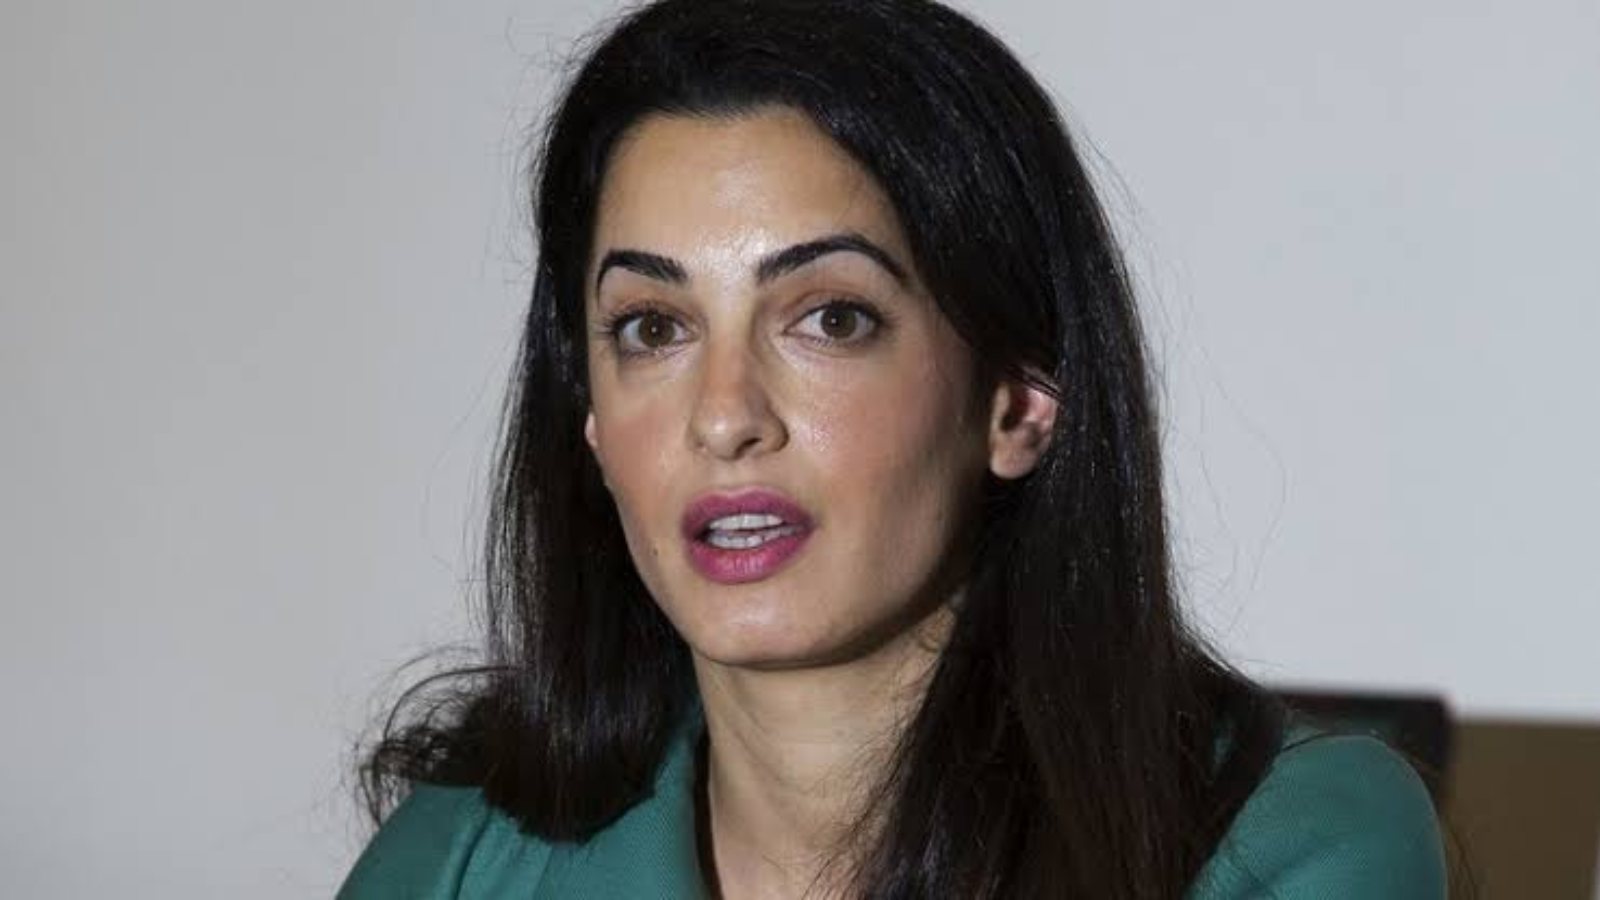 Amal Clooney Plastic Surgery: Has She Had Botox, a Facelift, and Eyelid ...